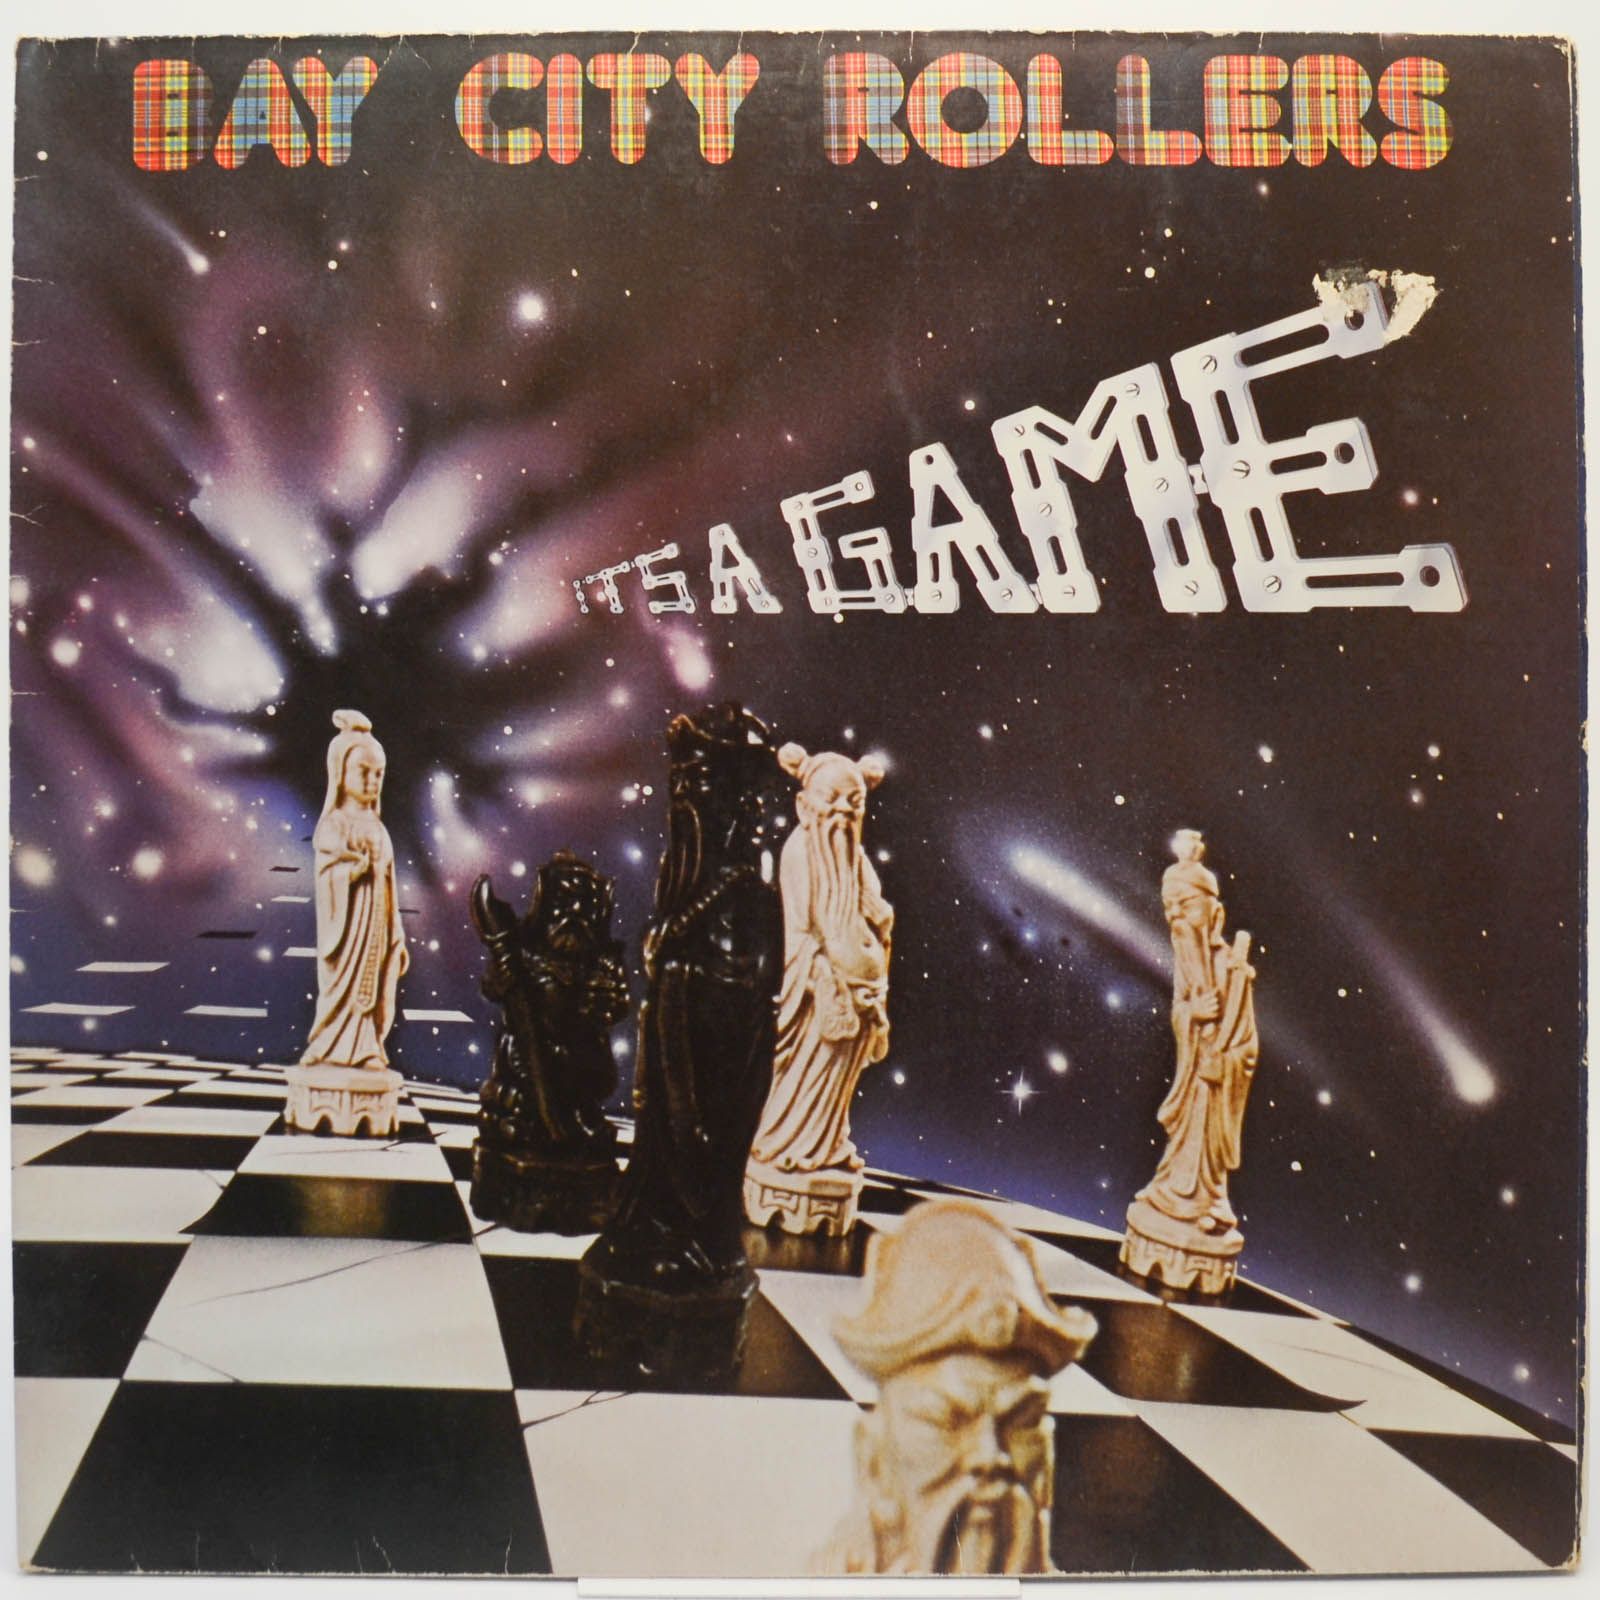 Bay City Rollers — It's A Game, 1977